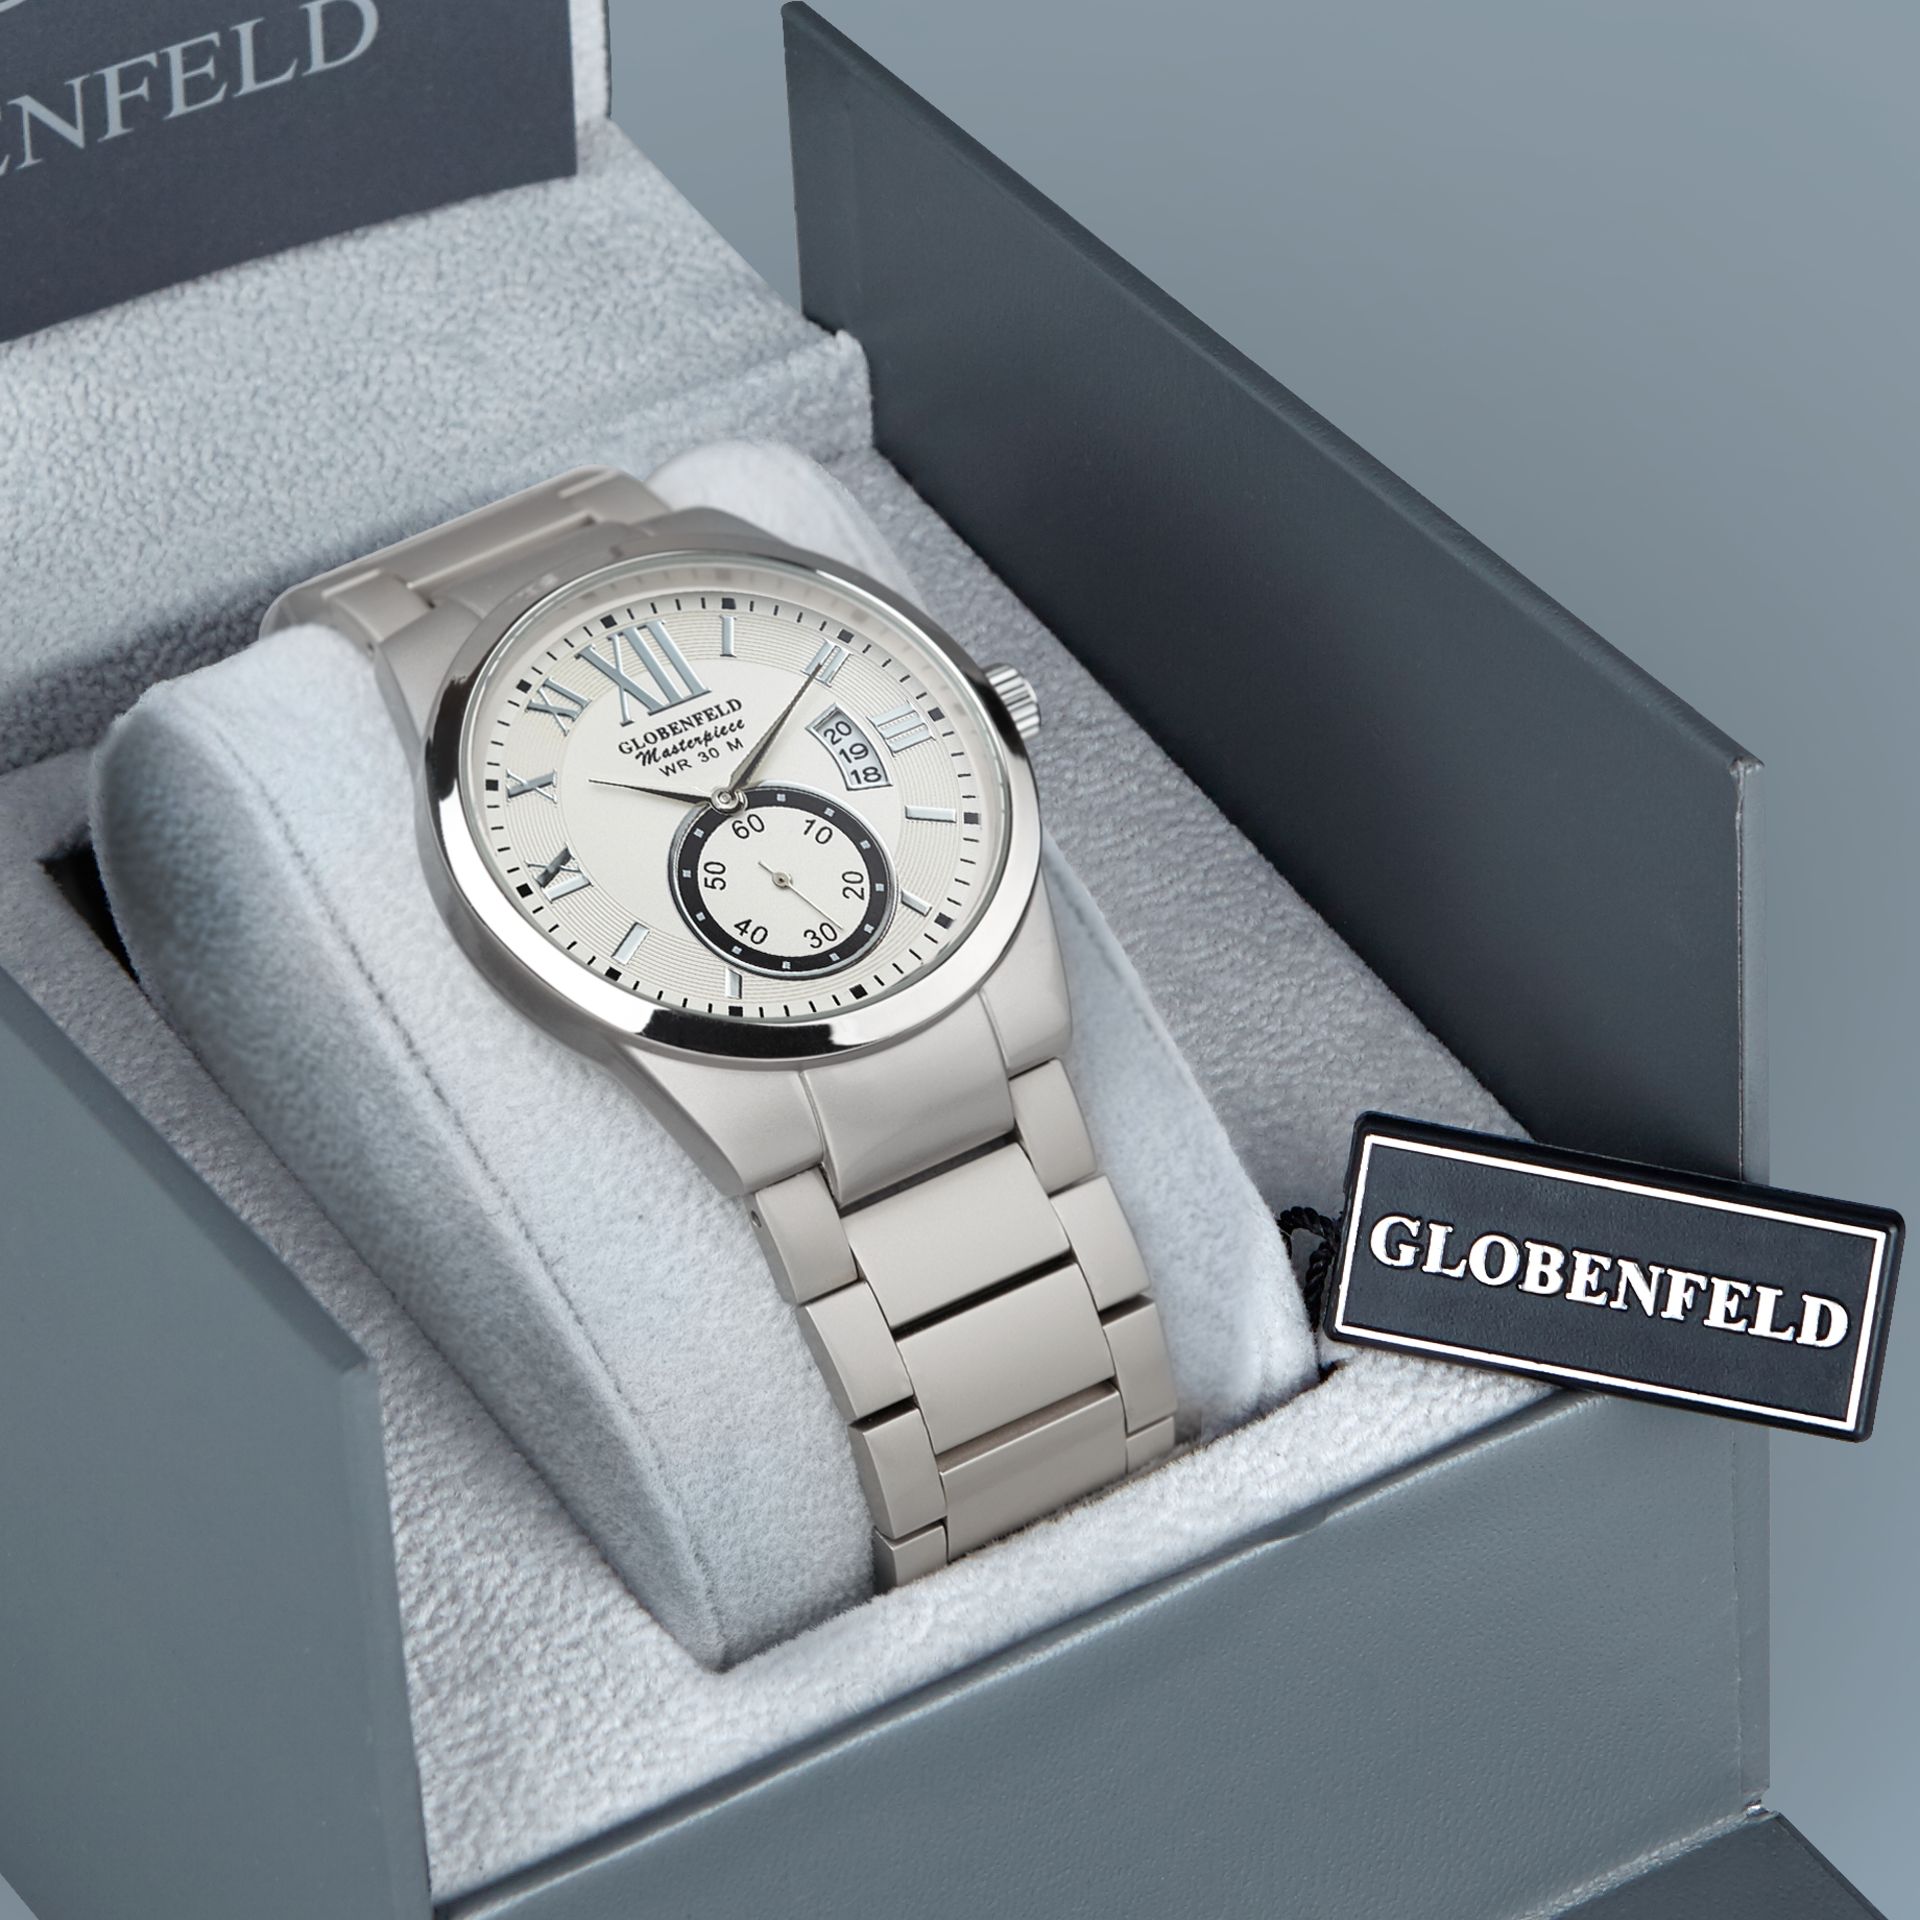 V *TRADE QTY* Brand New Gents Globenfeld White Masterpiece Watch With Box & Papers RRP440.00 X 3